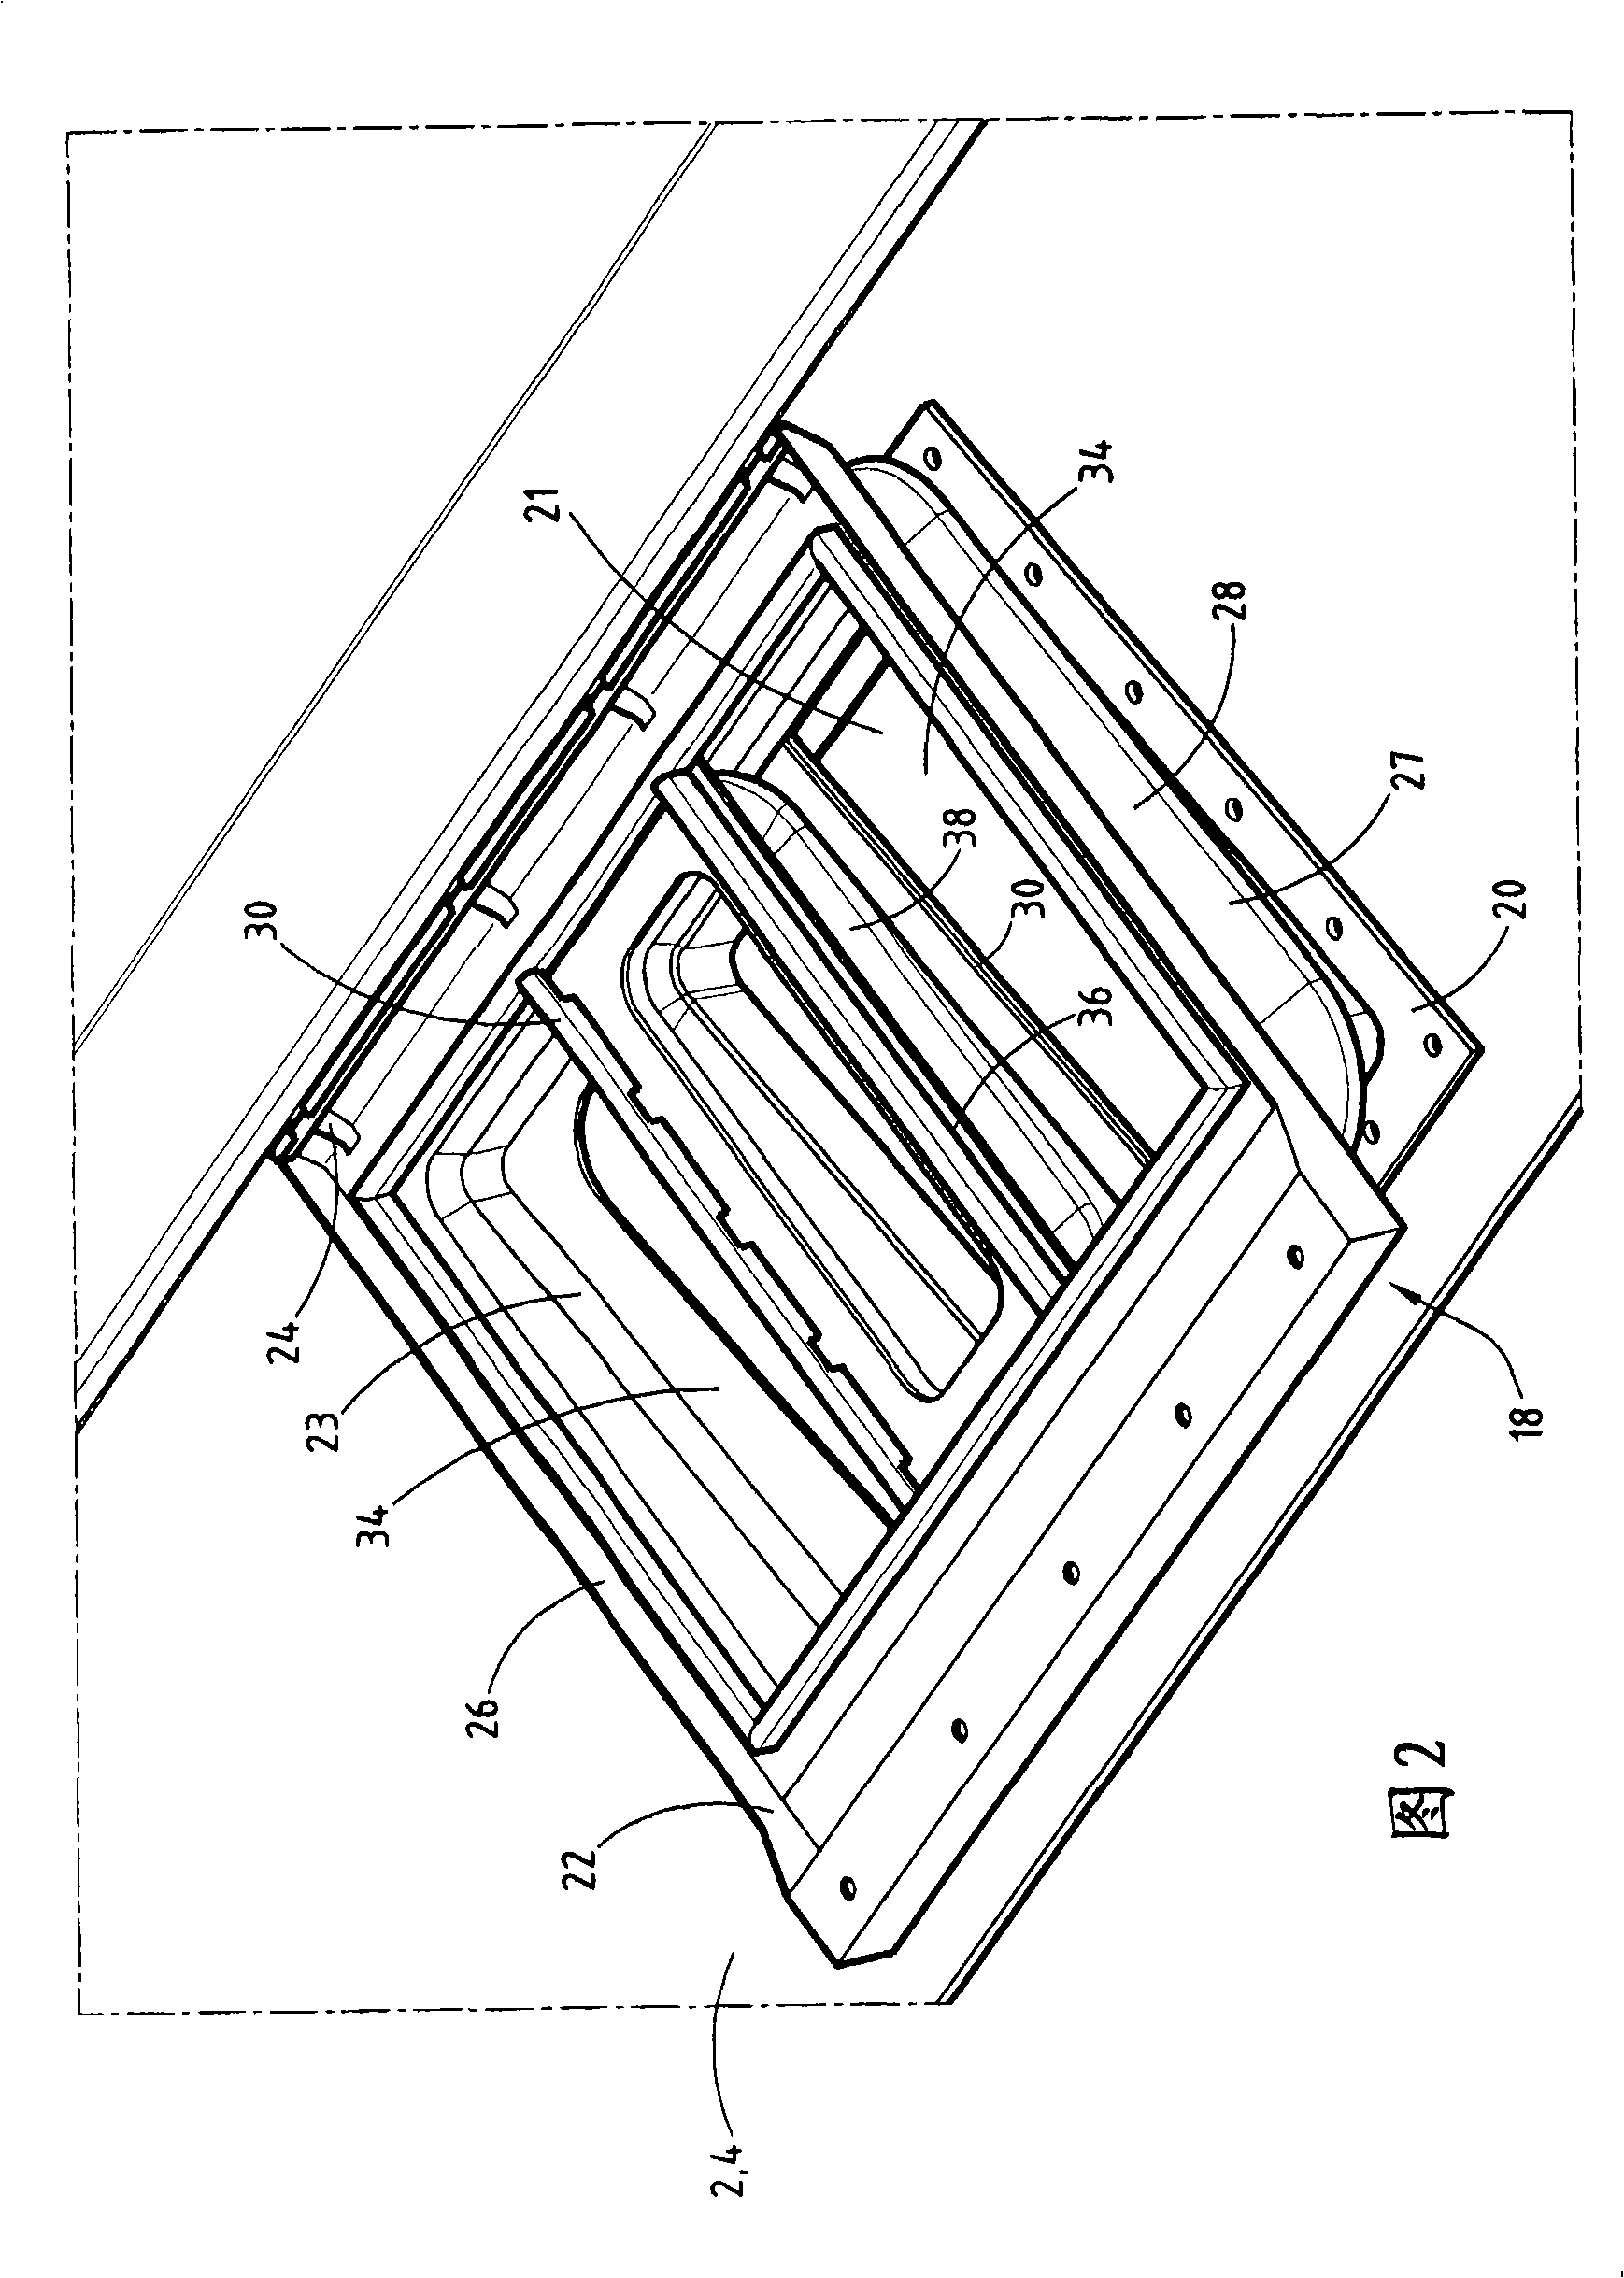 Railway vehicle with an air conditioning device fixed to the vehicle roof panel